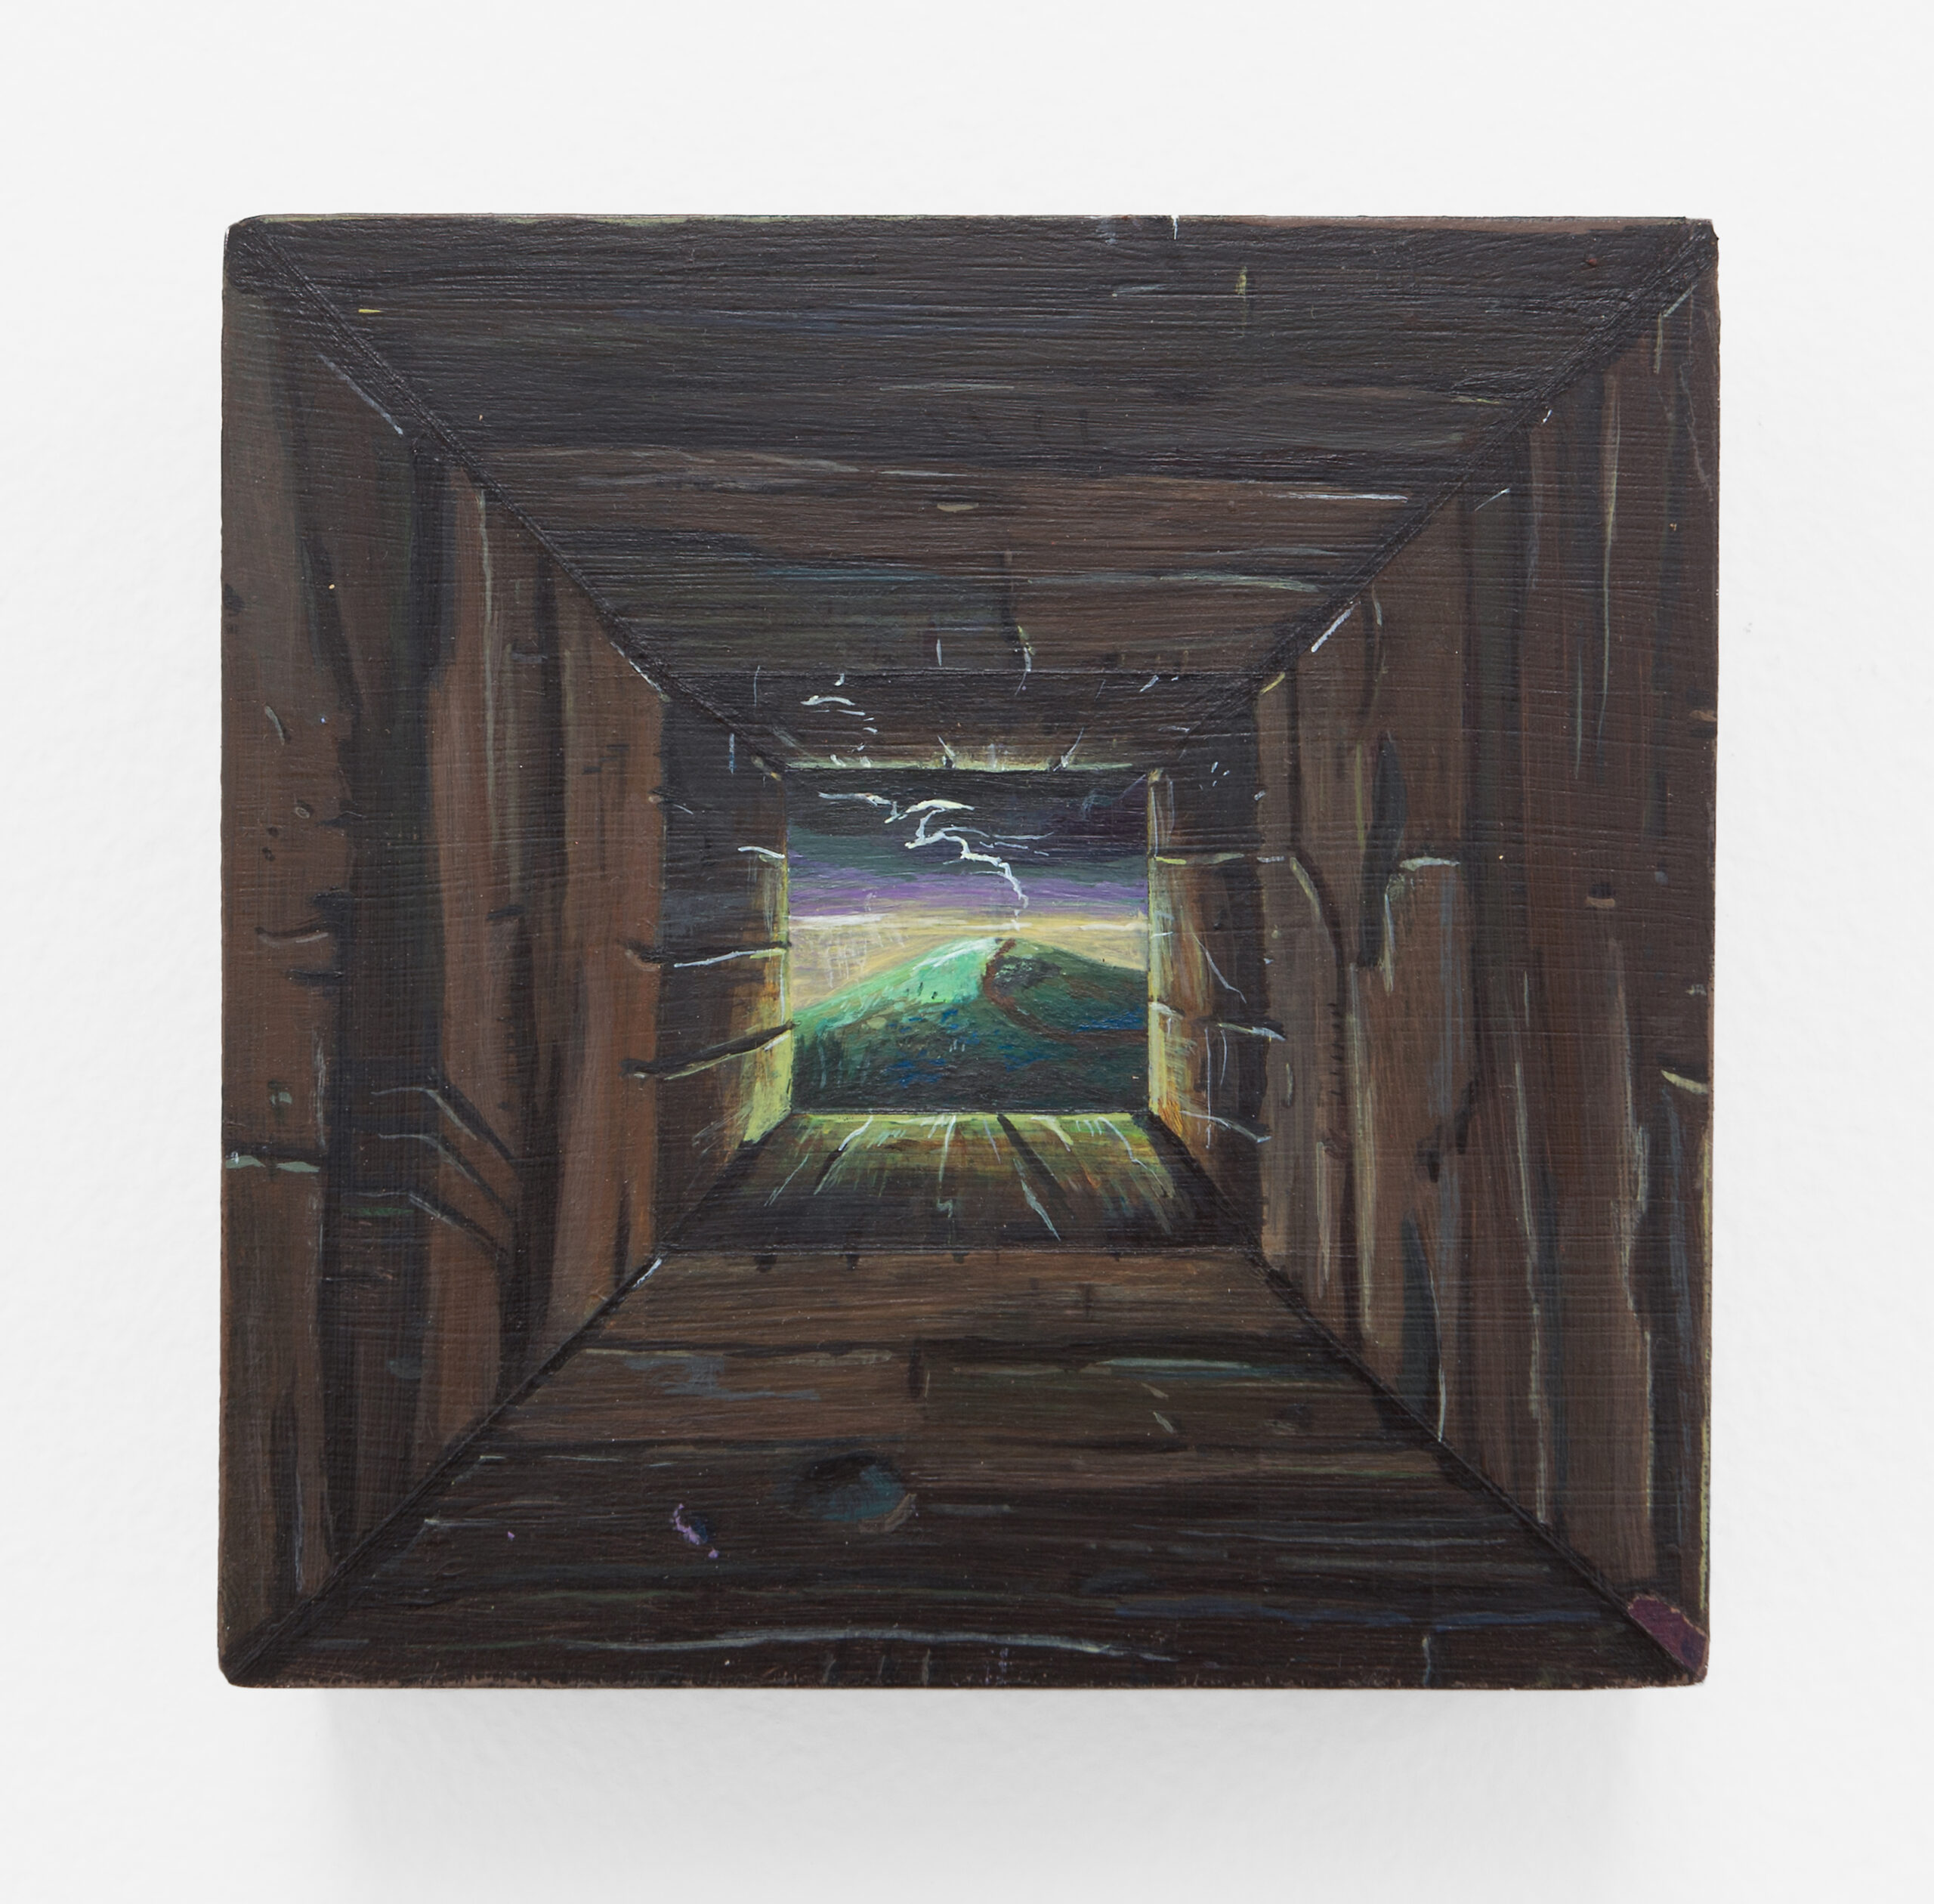 Alexander Harrison, Just Over the Hill, 2021, Acrylic on panel, 4 x 4 inches, Courtesy the artist and Various Small Fires, Los Angeles / Seoul